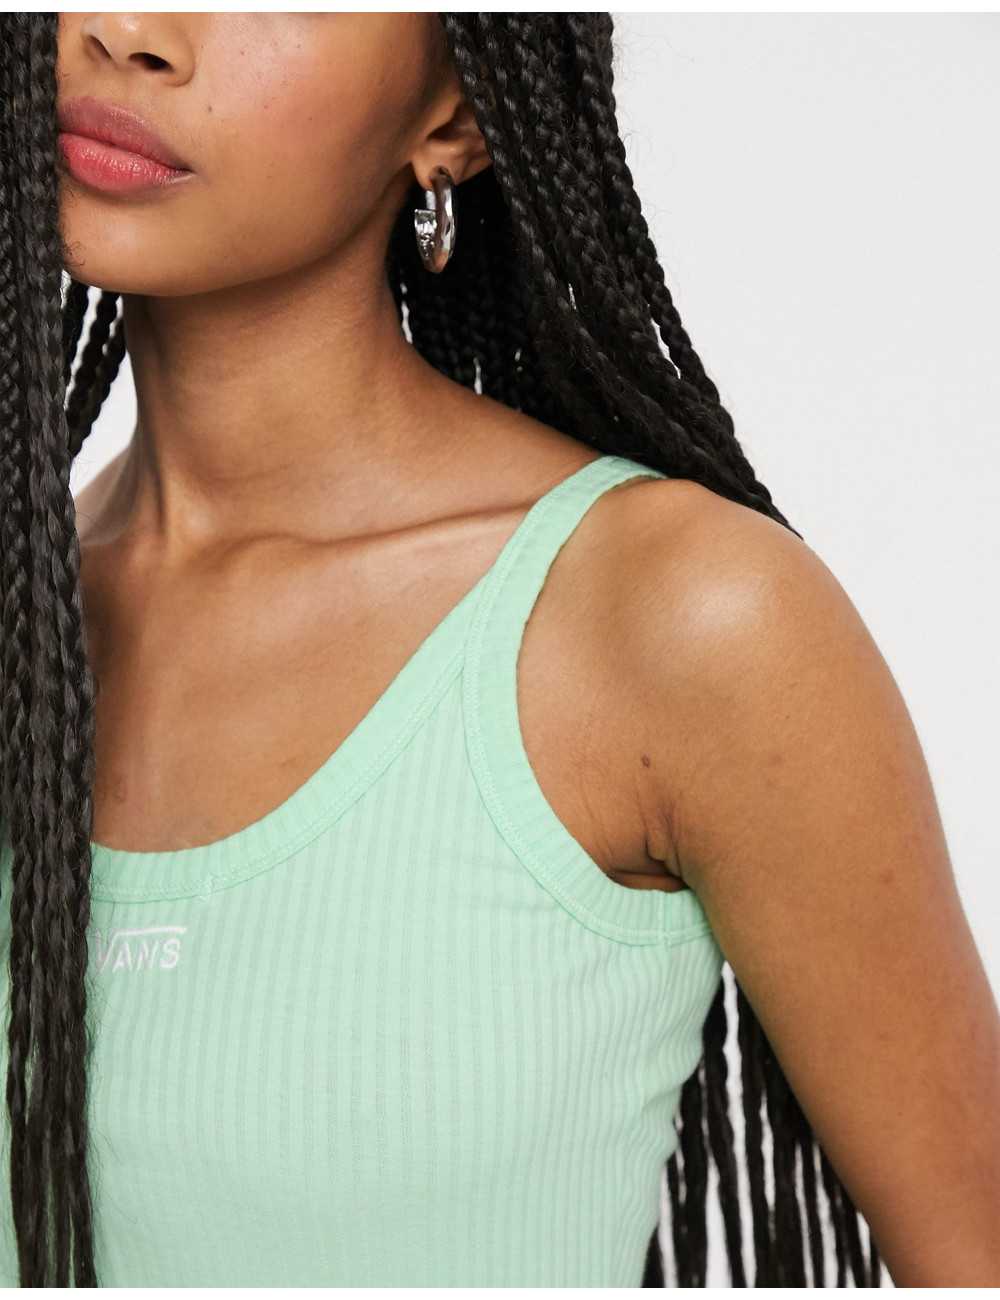 Vans Session Up tank top in...